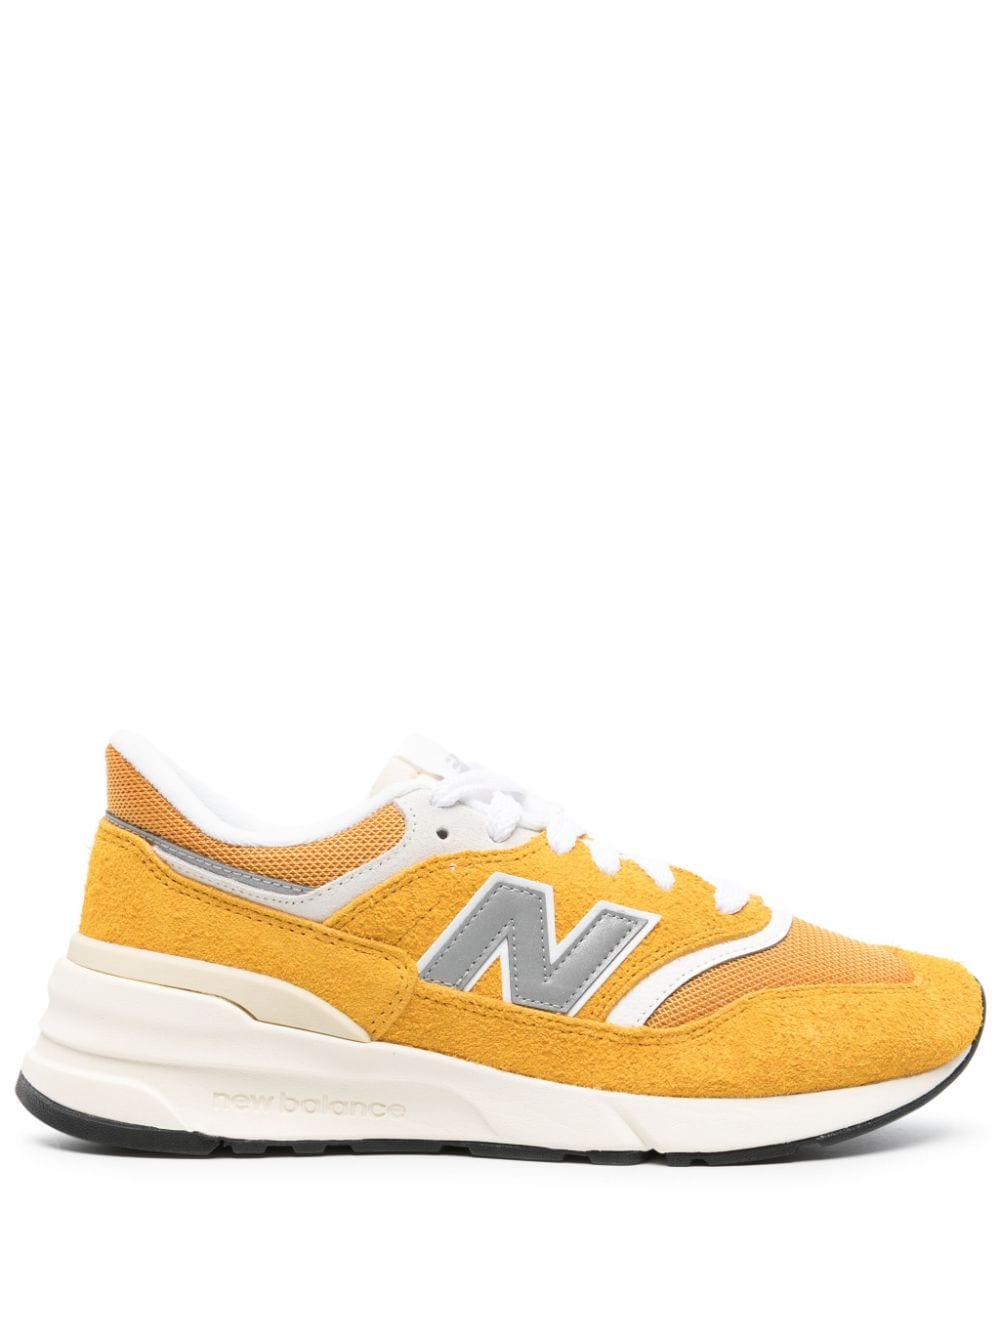 New Balance 997R suede sneakers - Yellow